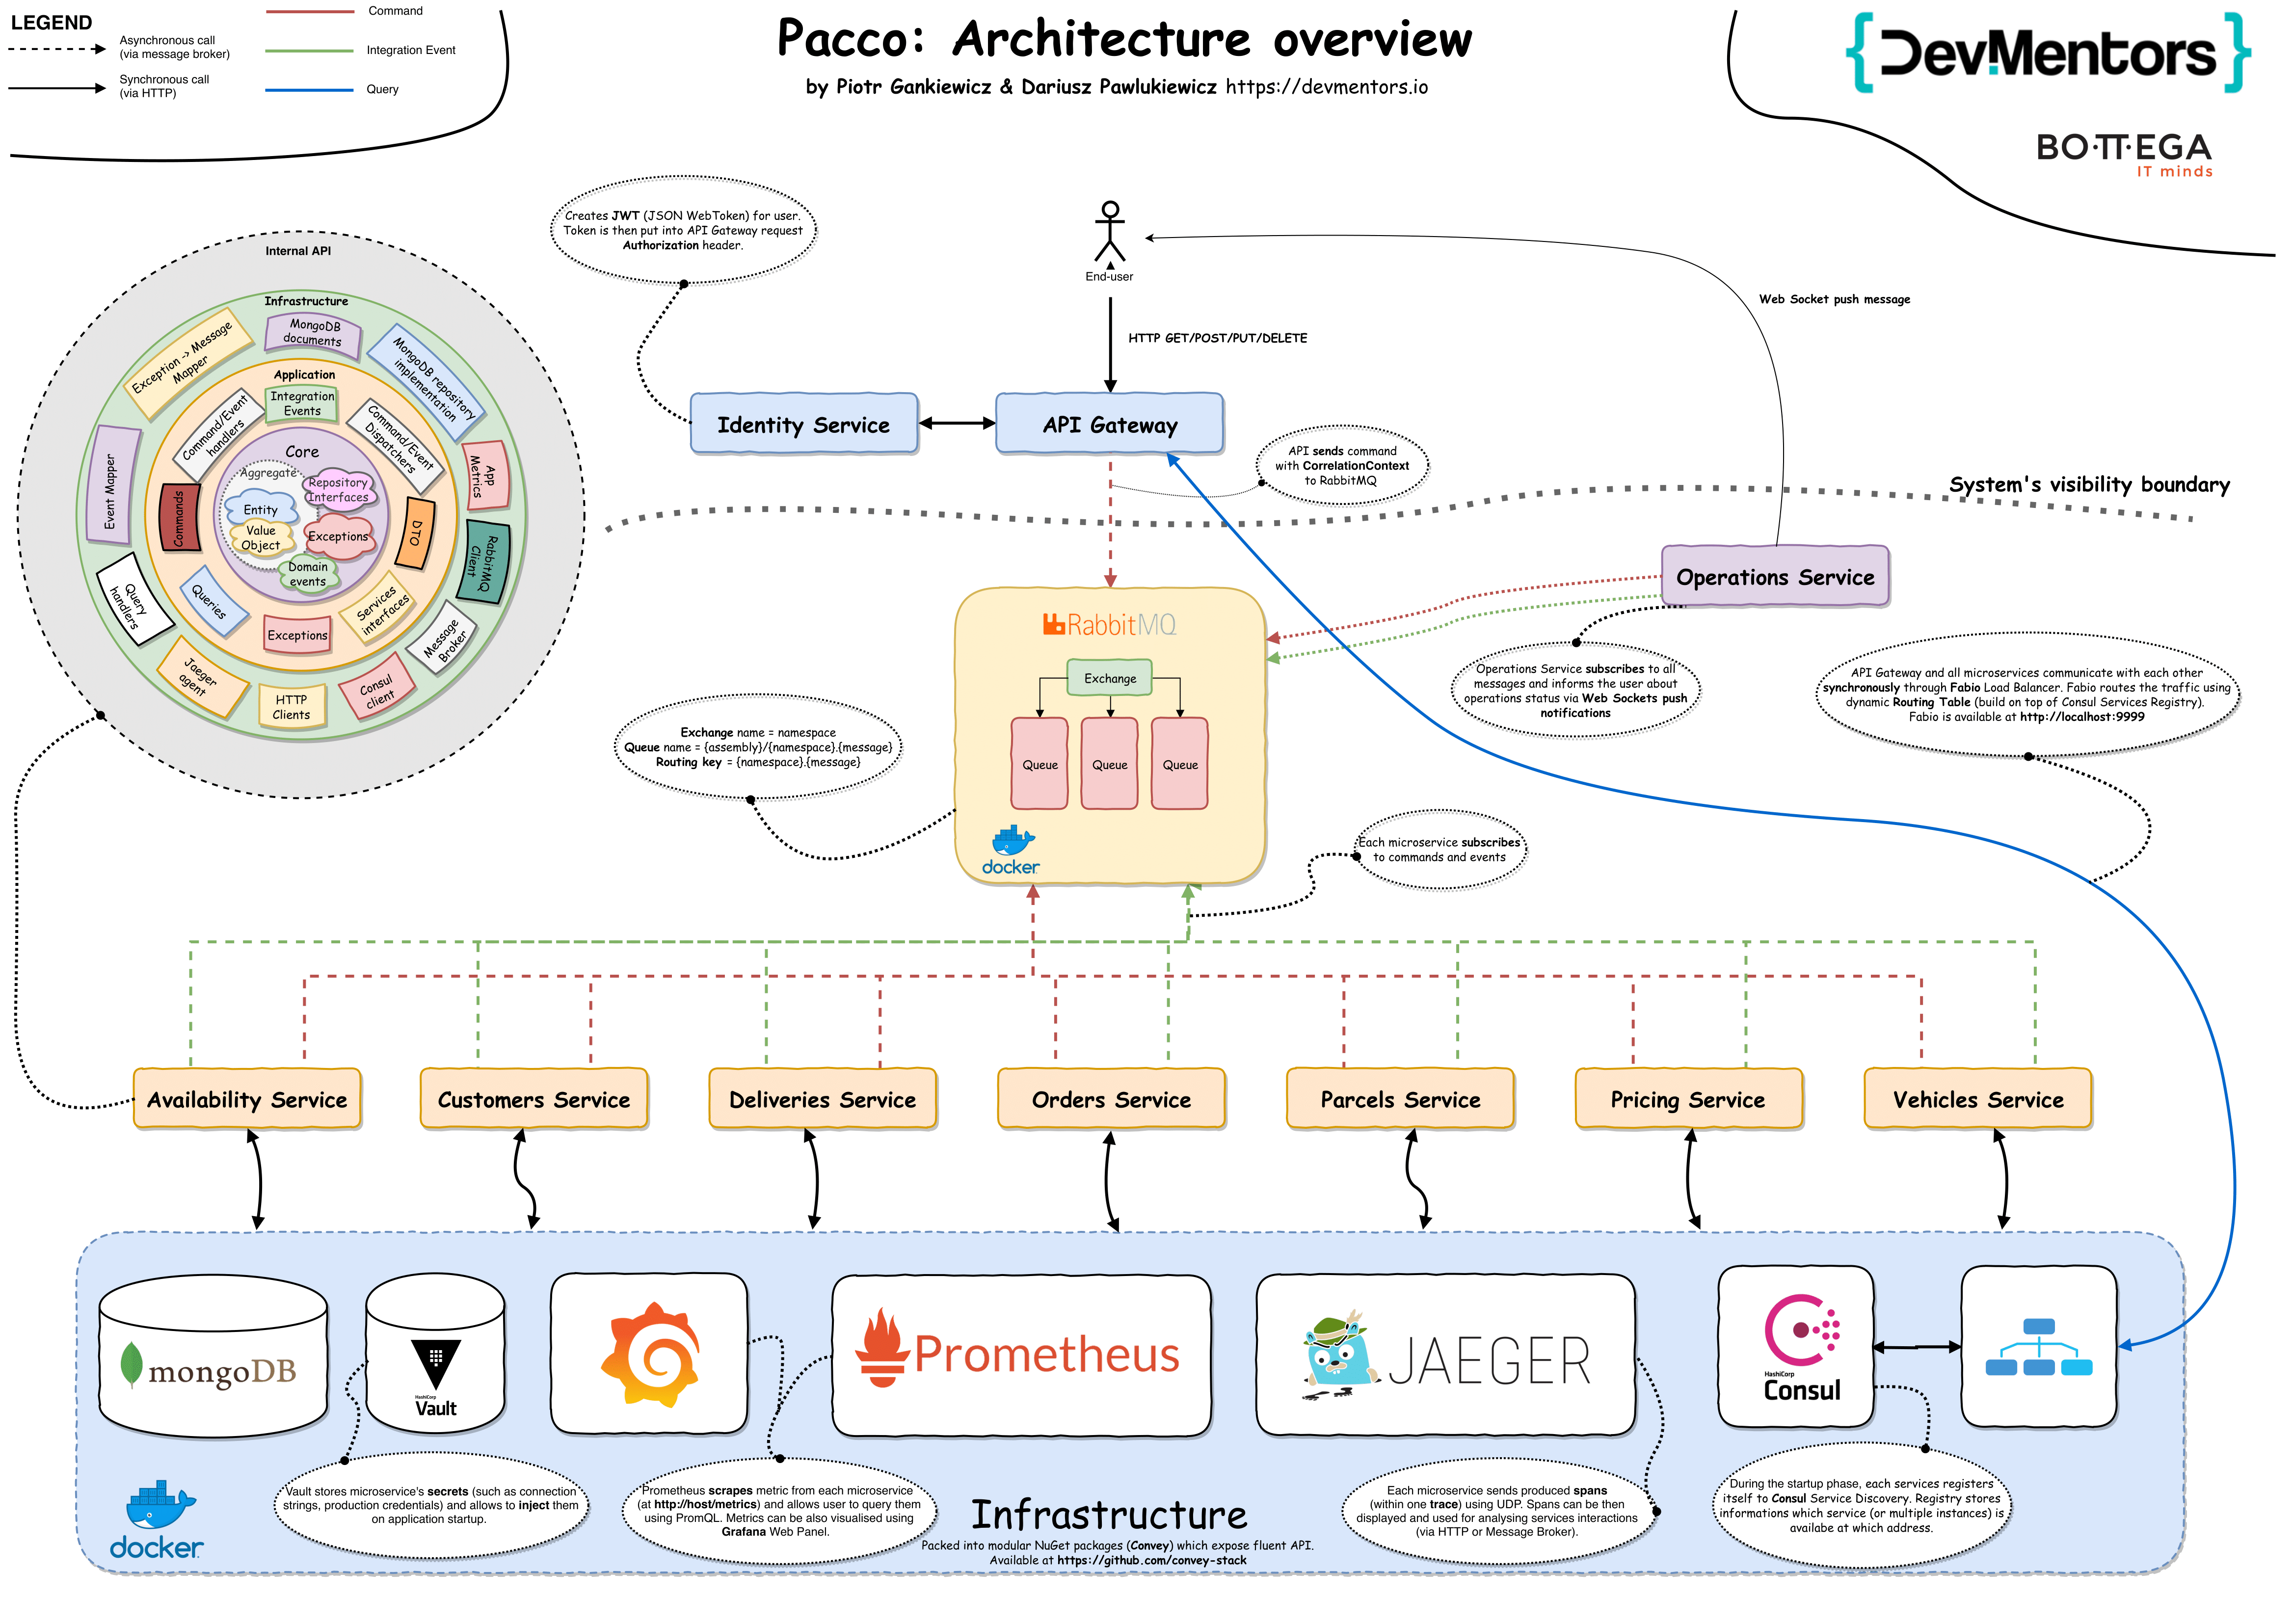 Pacco overview